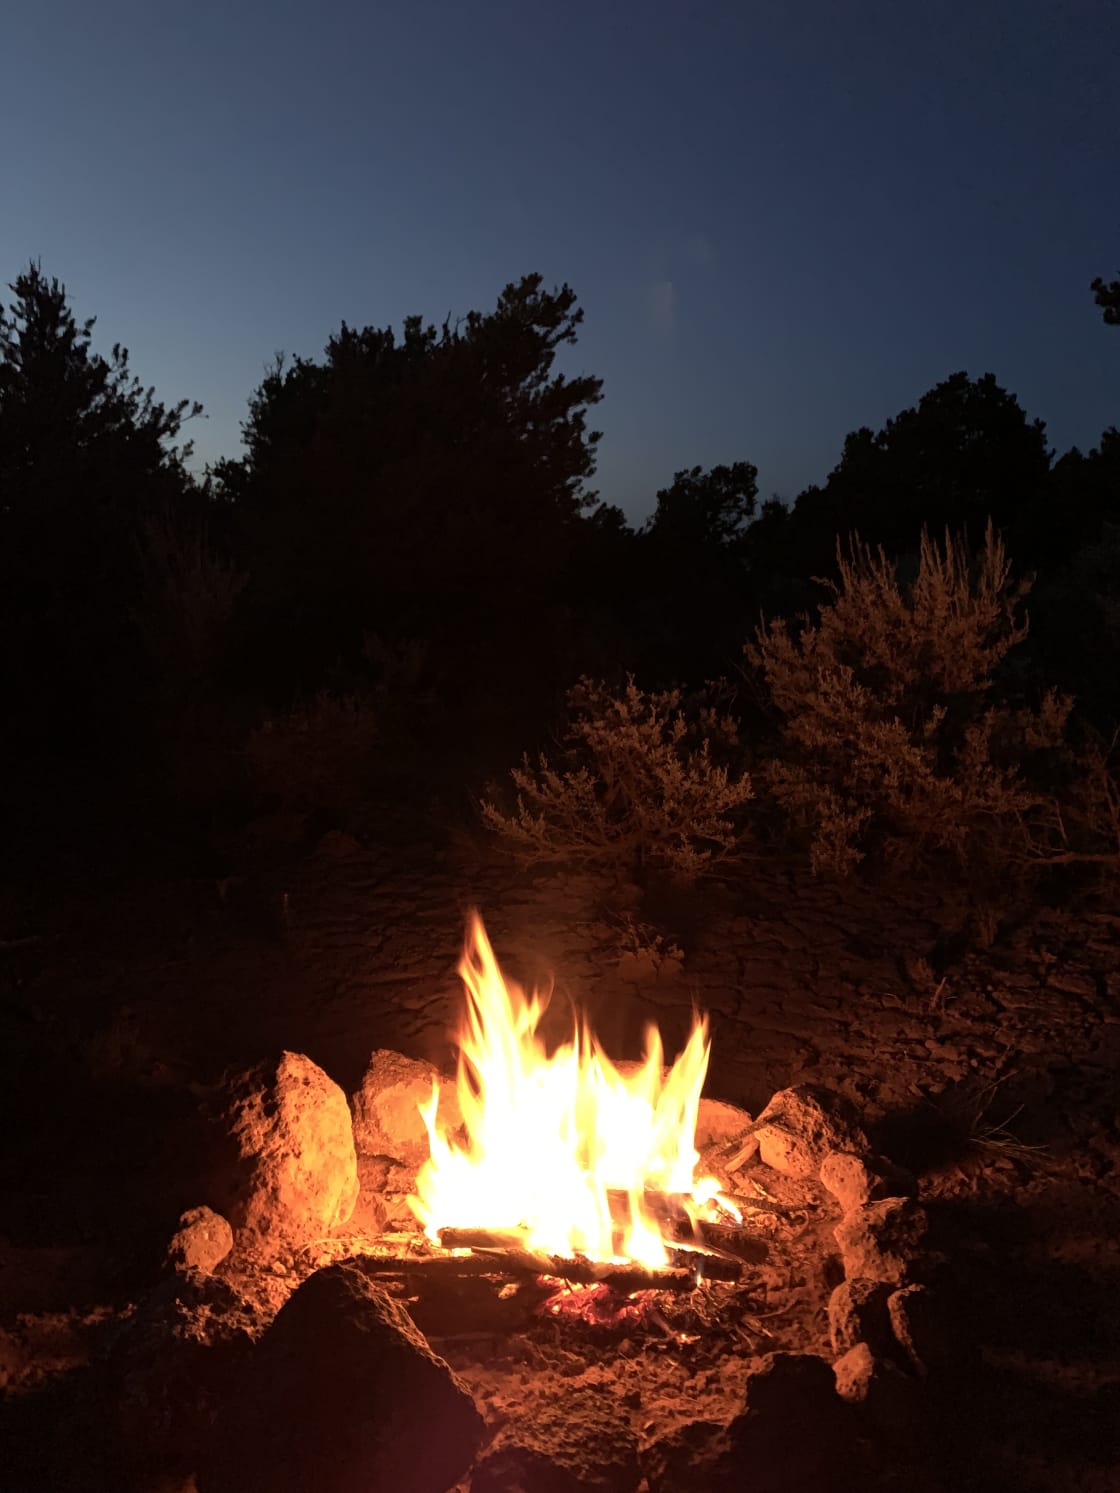 Nothing like a campfire on a cool, clear night!